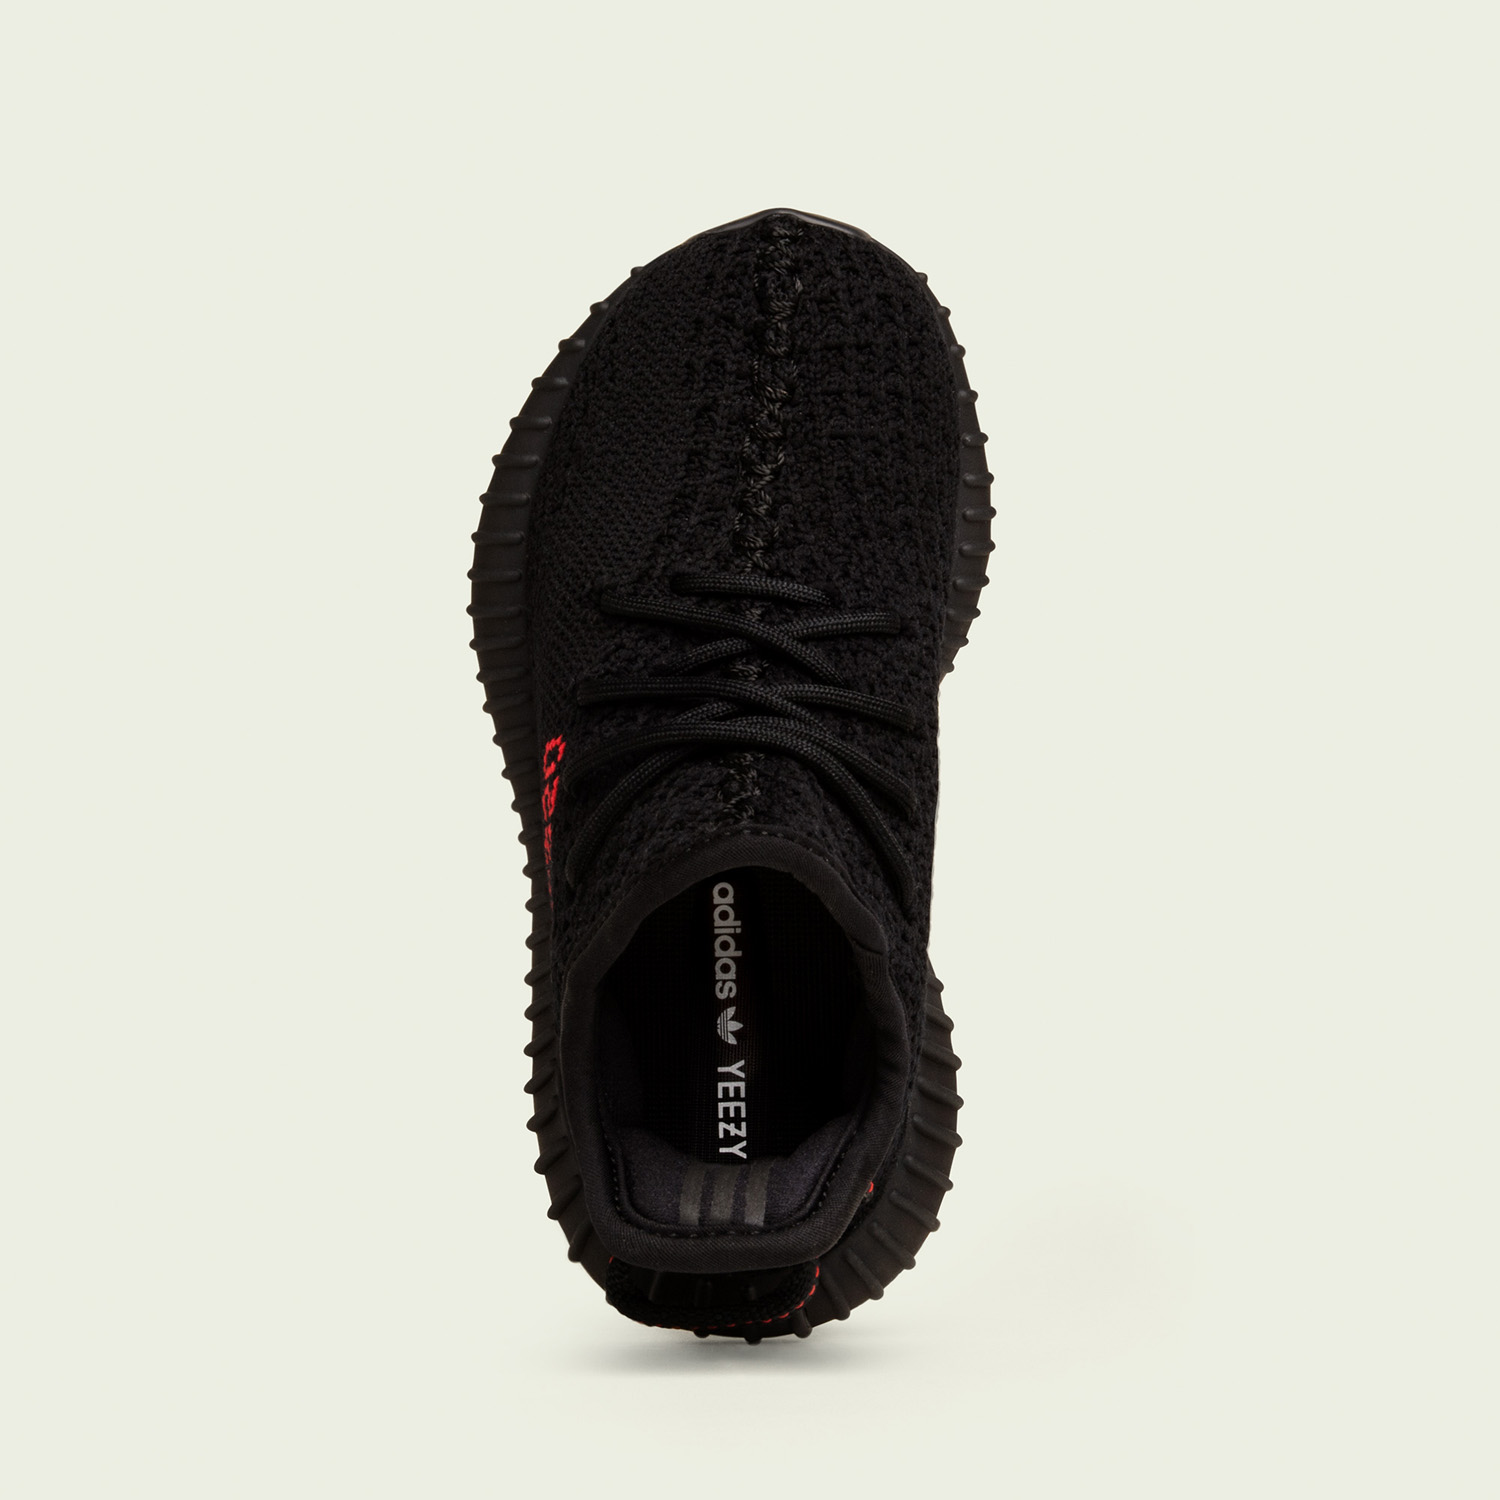 Yeezy boost 350 V 2 'black red' Adult and infant images uk for Women